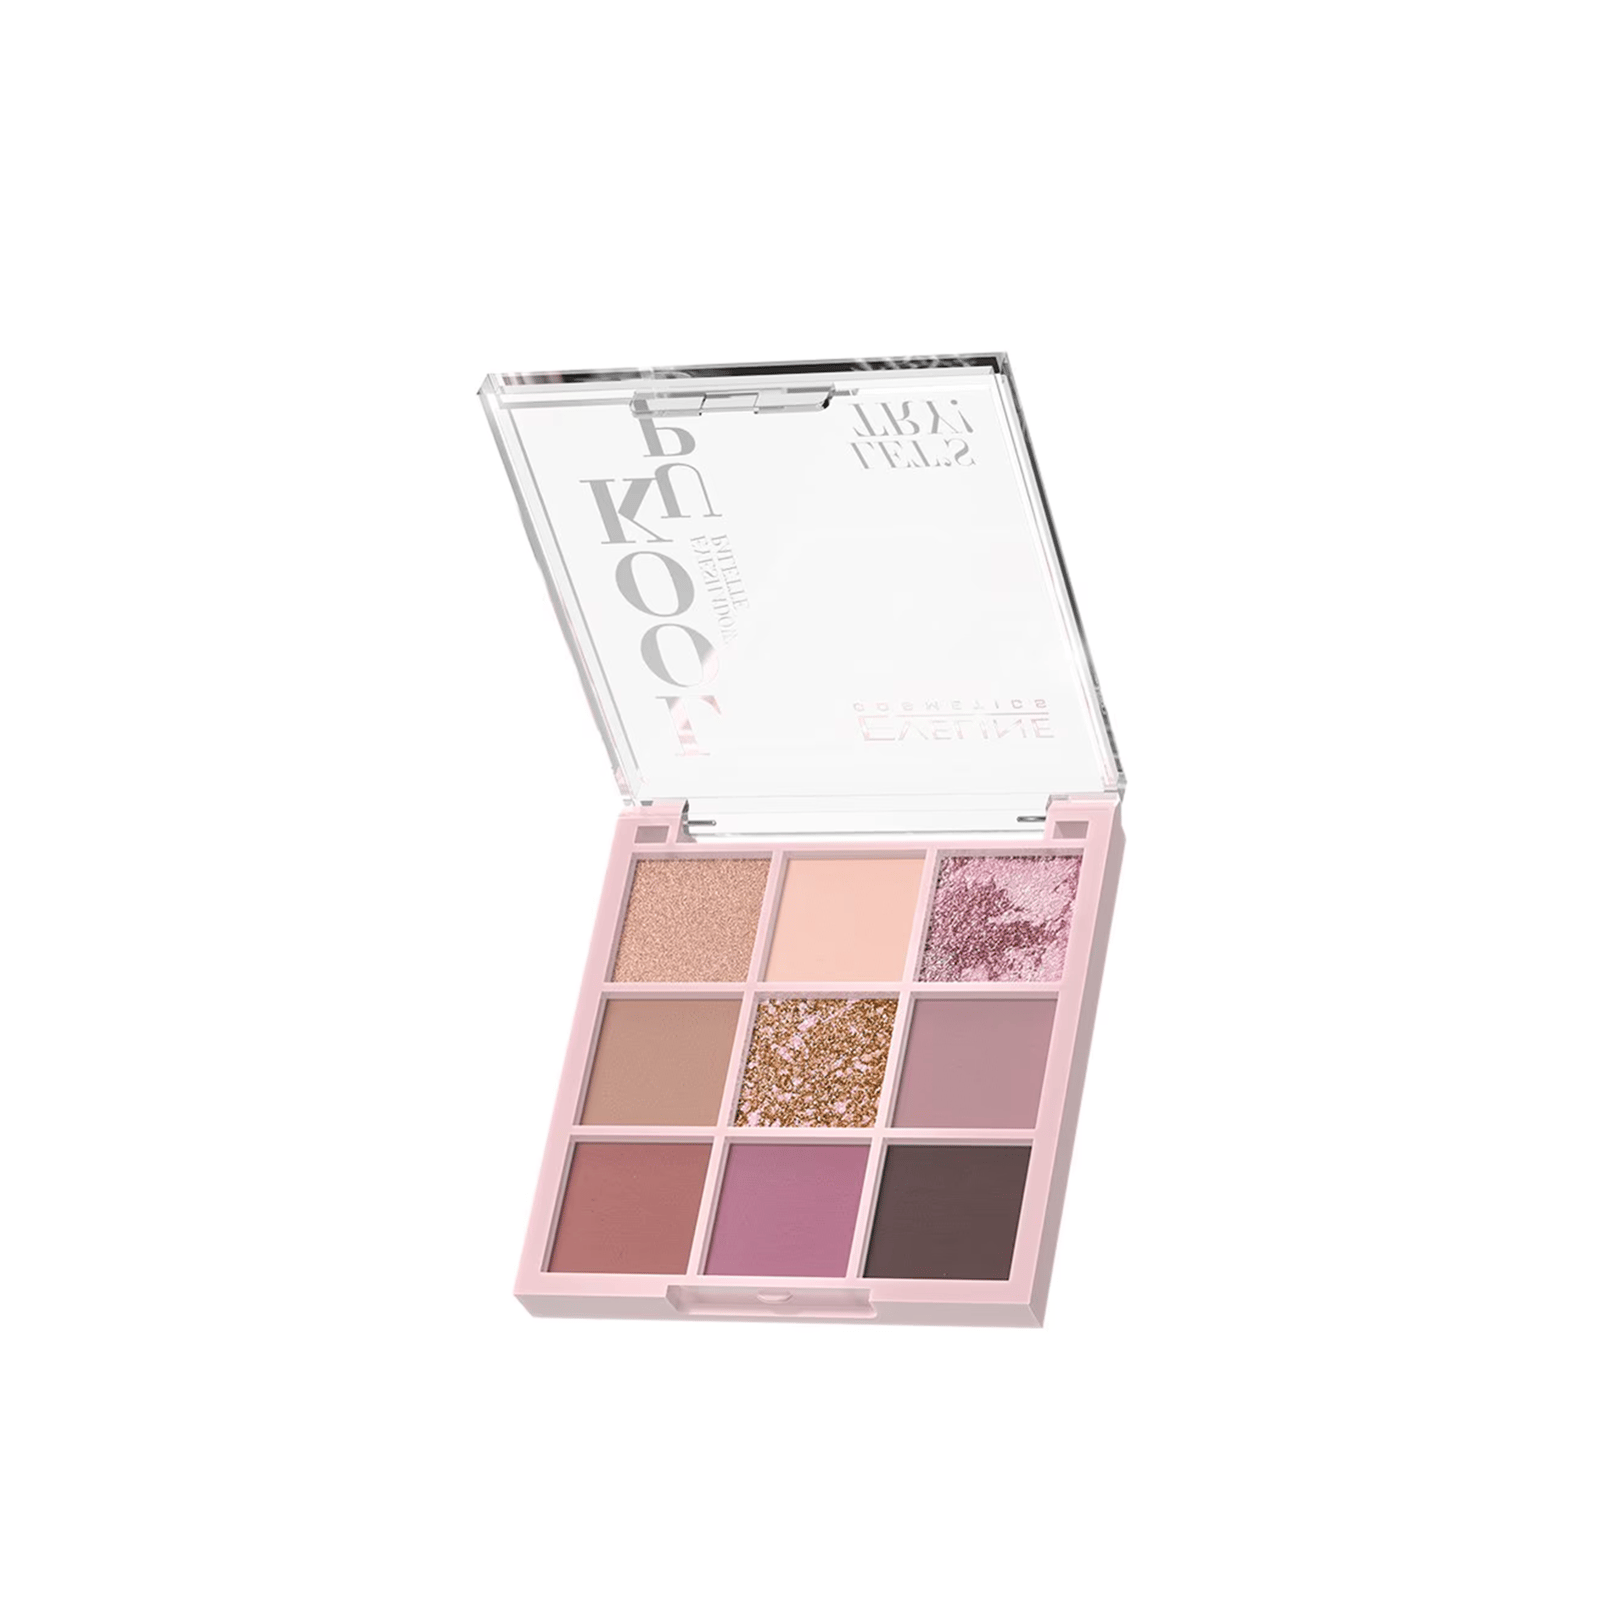 Eveline Cosmetics Look Up Eyeshadow Palette Let's Try!10.8g